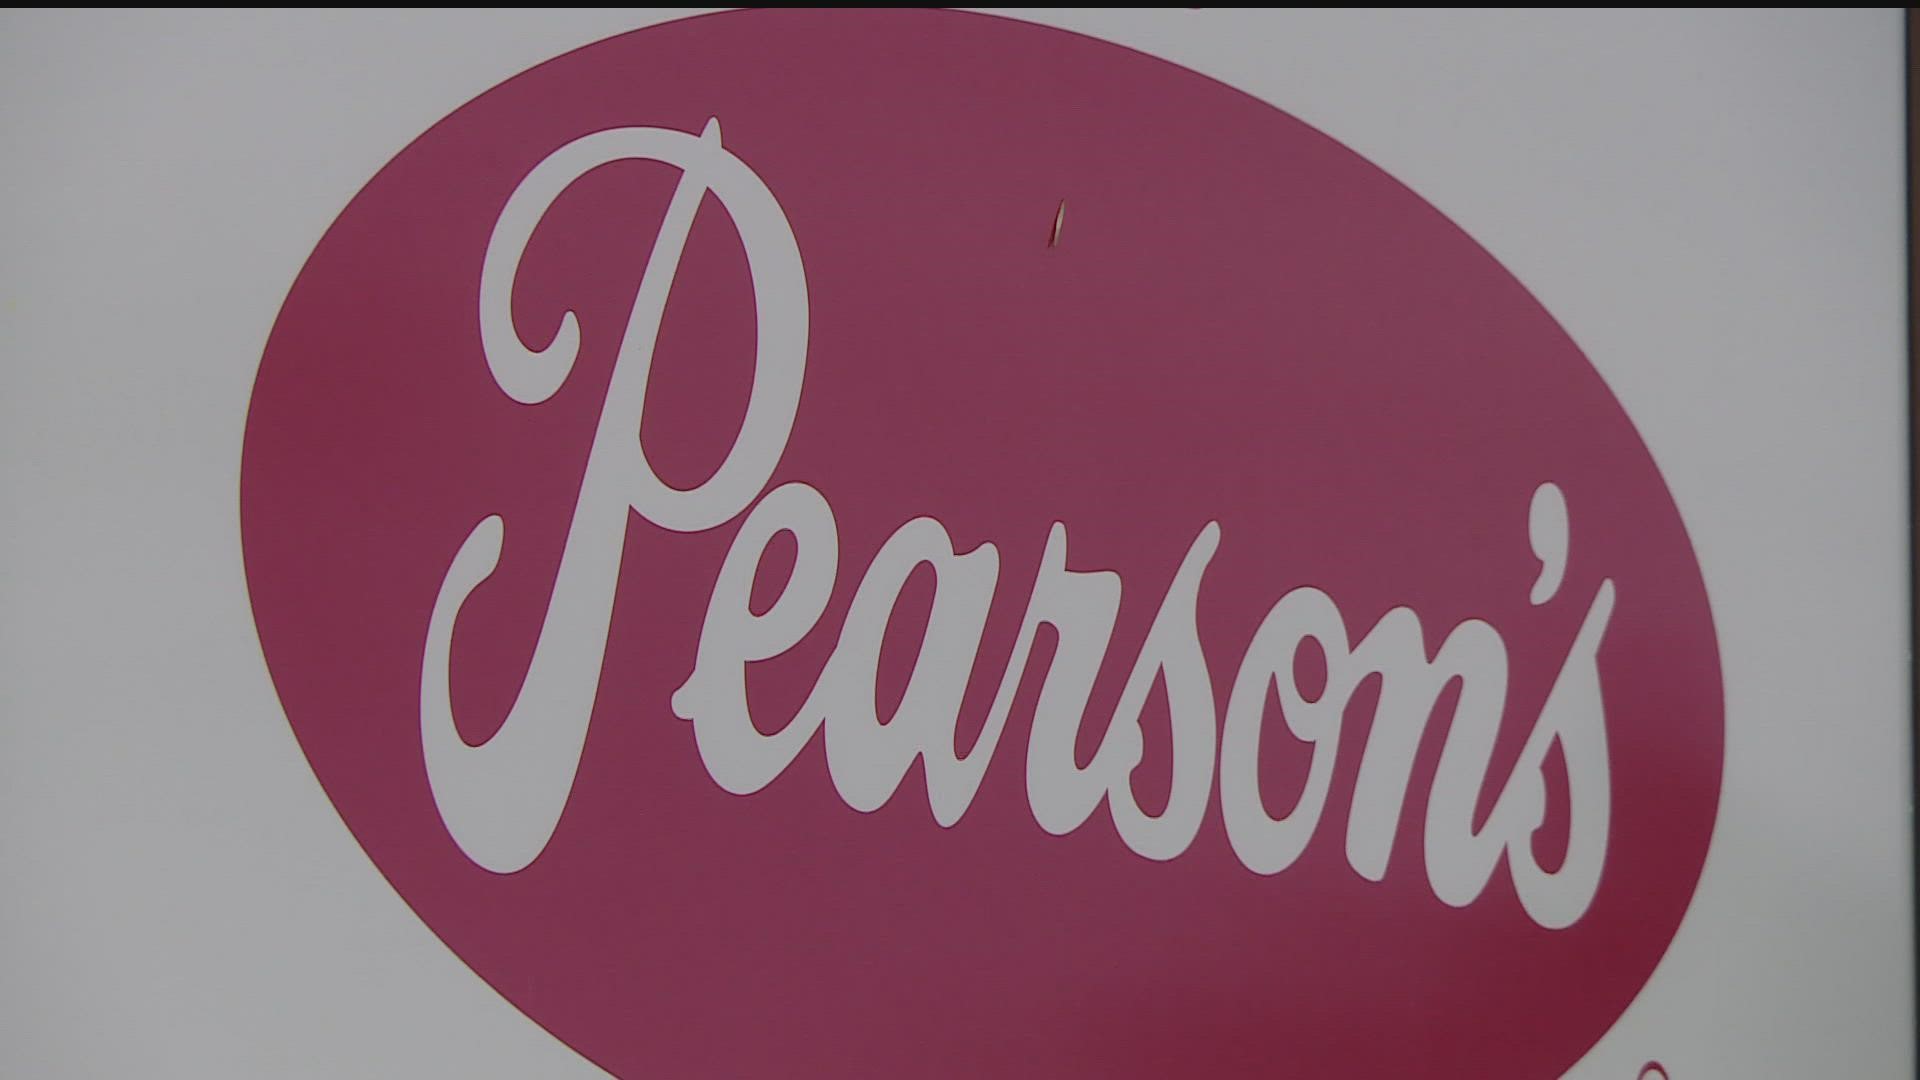 Pearson's Candy Company was founded in 1909 by P. Edward Pearson and his two brothers.